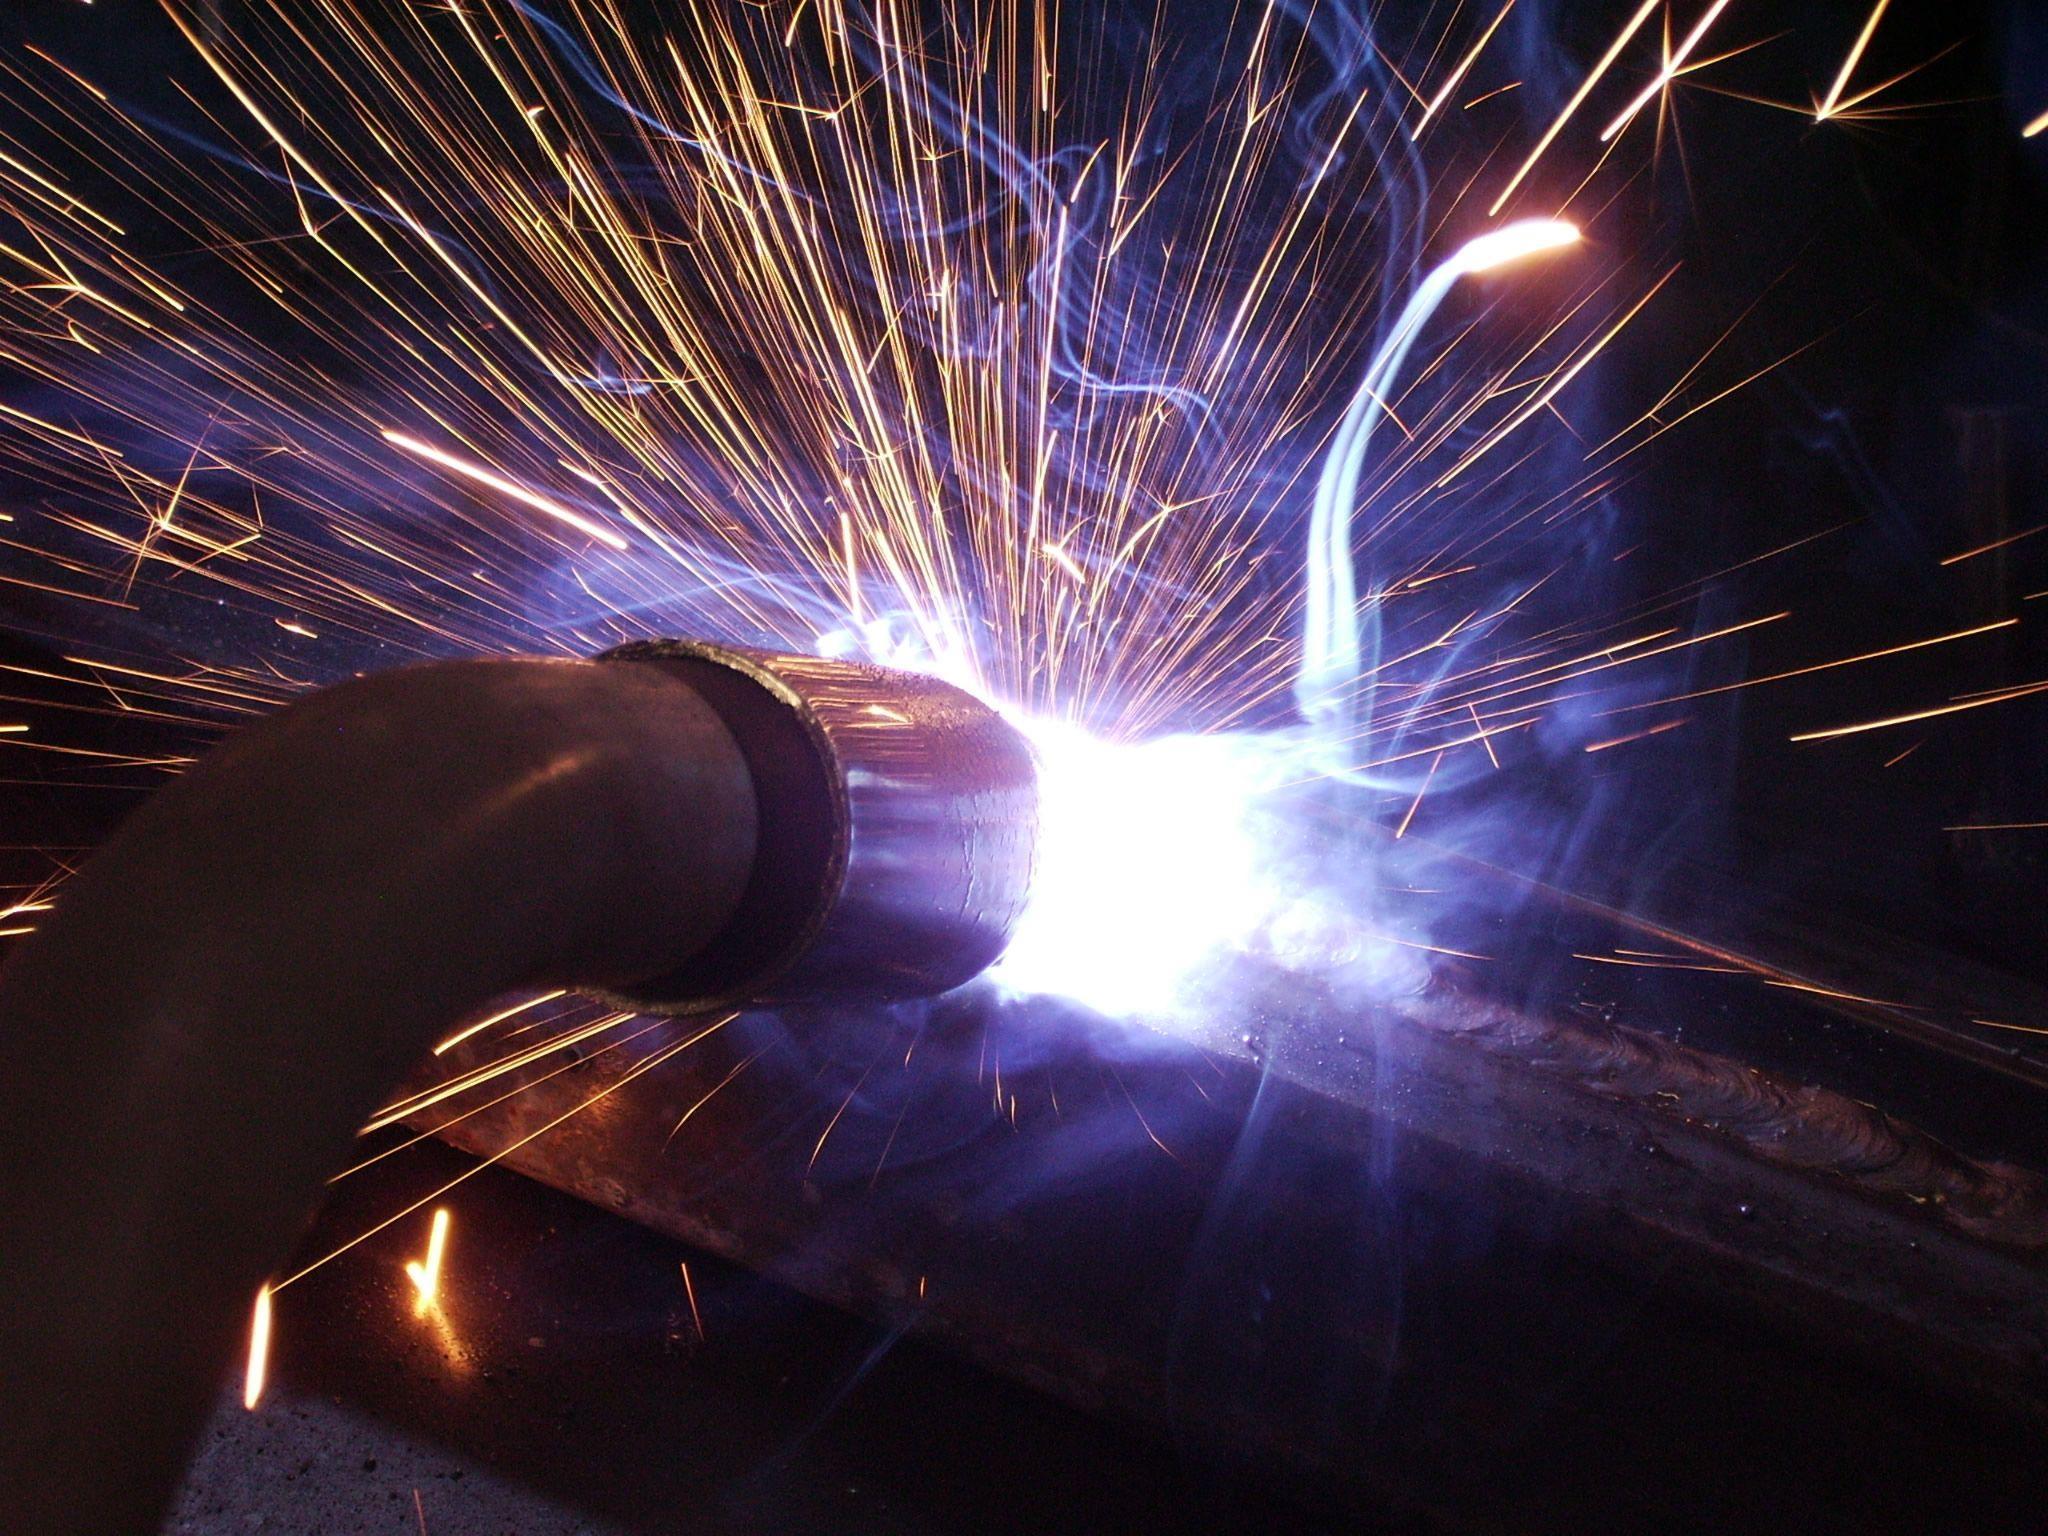 Download Welding wallpapers for mobile phone free Welding HD pictures